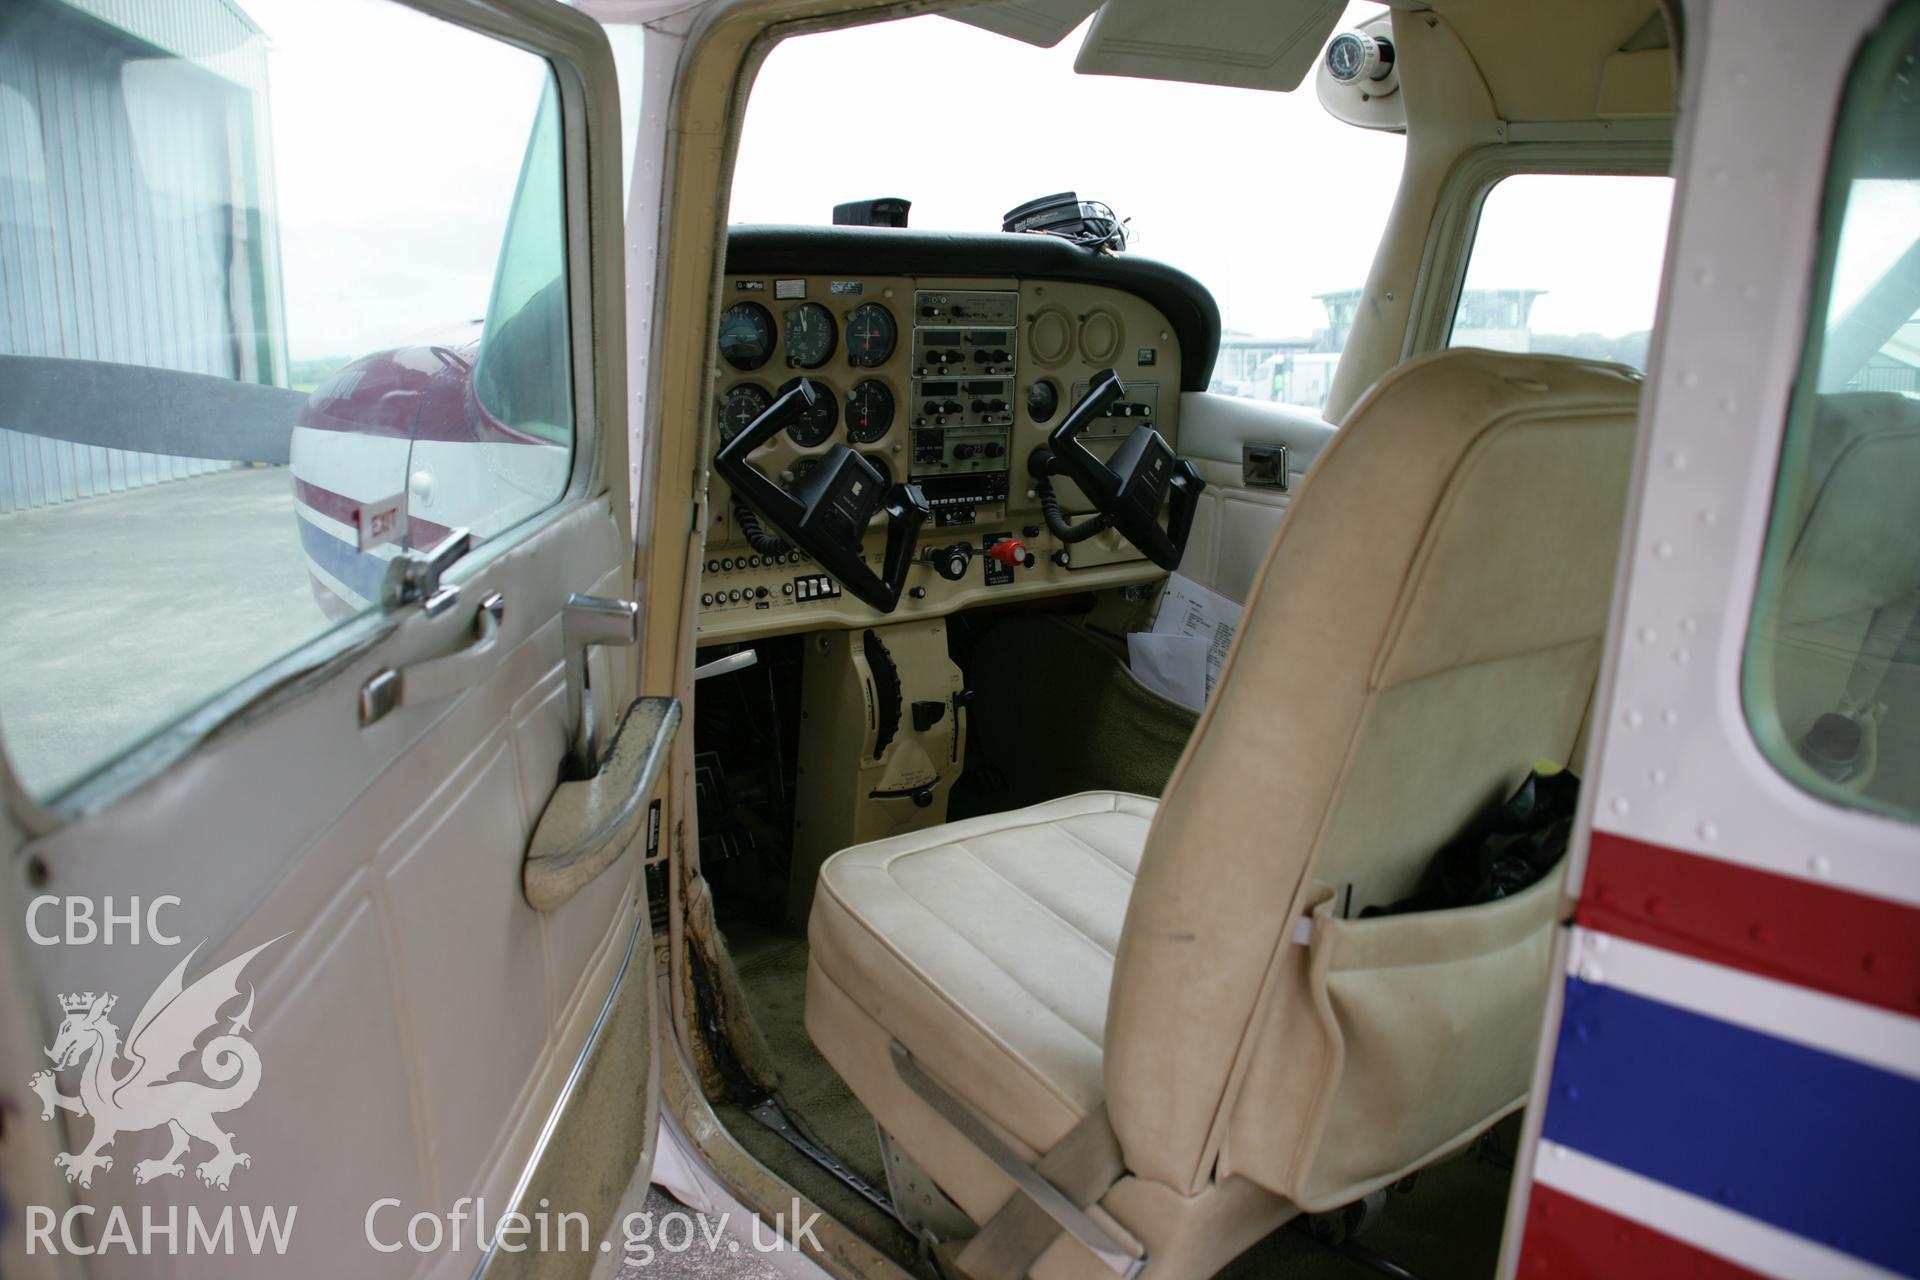 RCAHMW colour photograph of Haverfordwest Airfield (Withybush), showing the cockpit of a Cessna 172. Taken on 15 June 2006 by Toby Driver